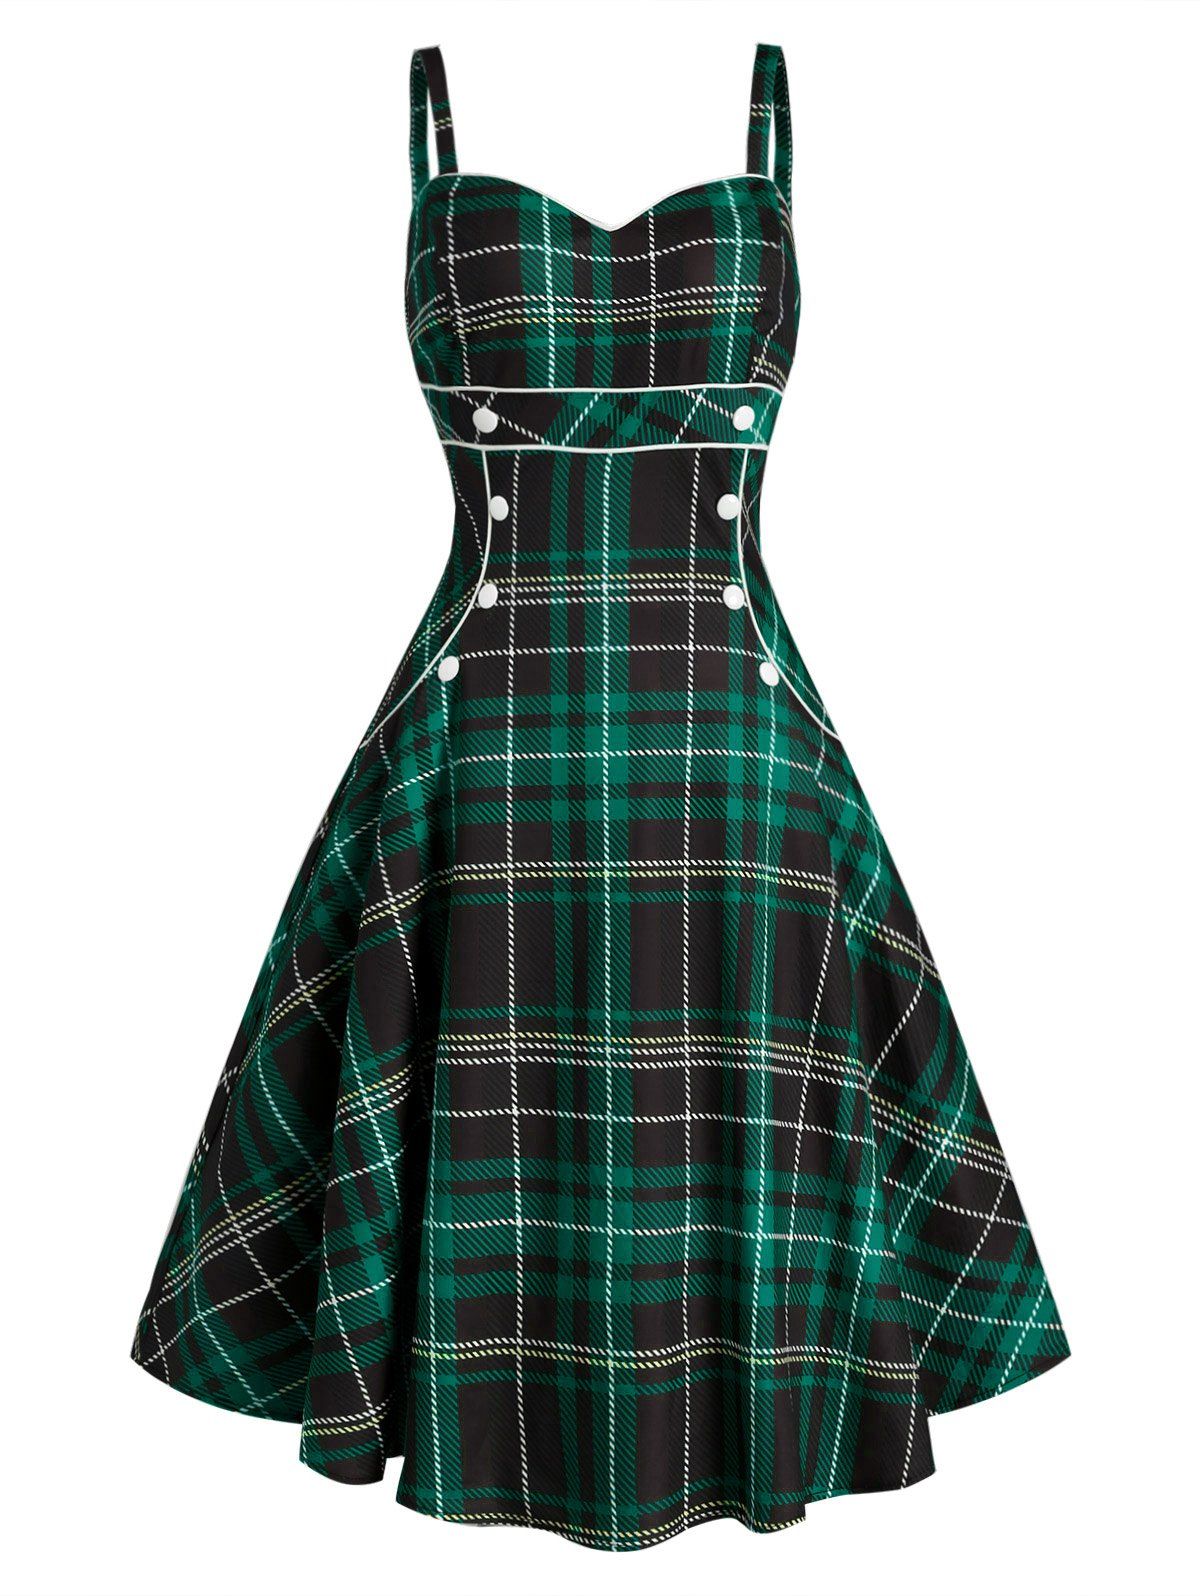 Vintage Rockabilly Plaid Corset Style Fit and Flare Cami Dress - multicolor B L